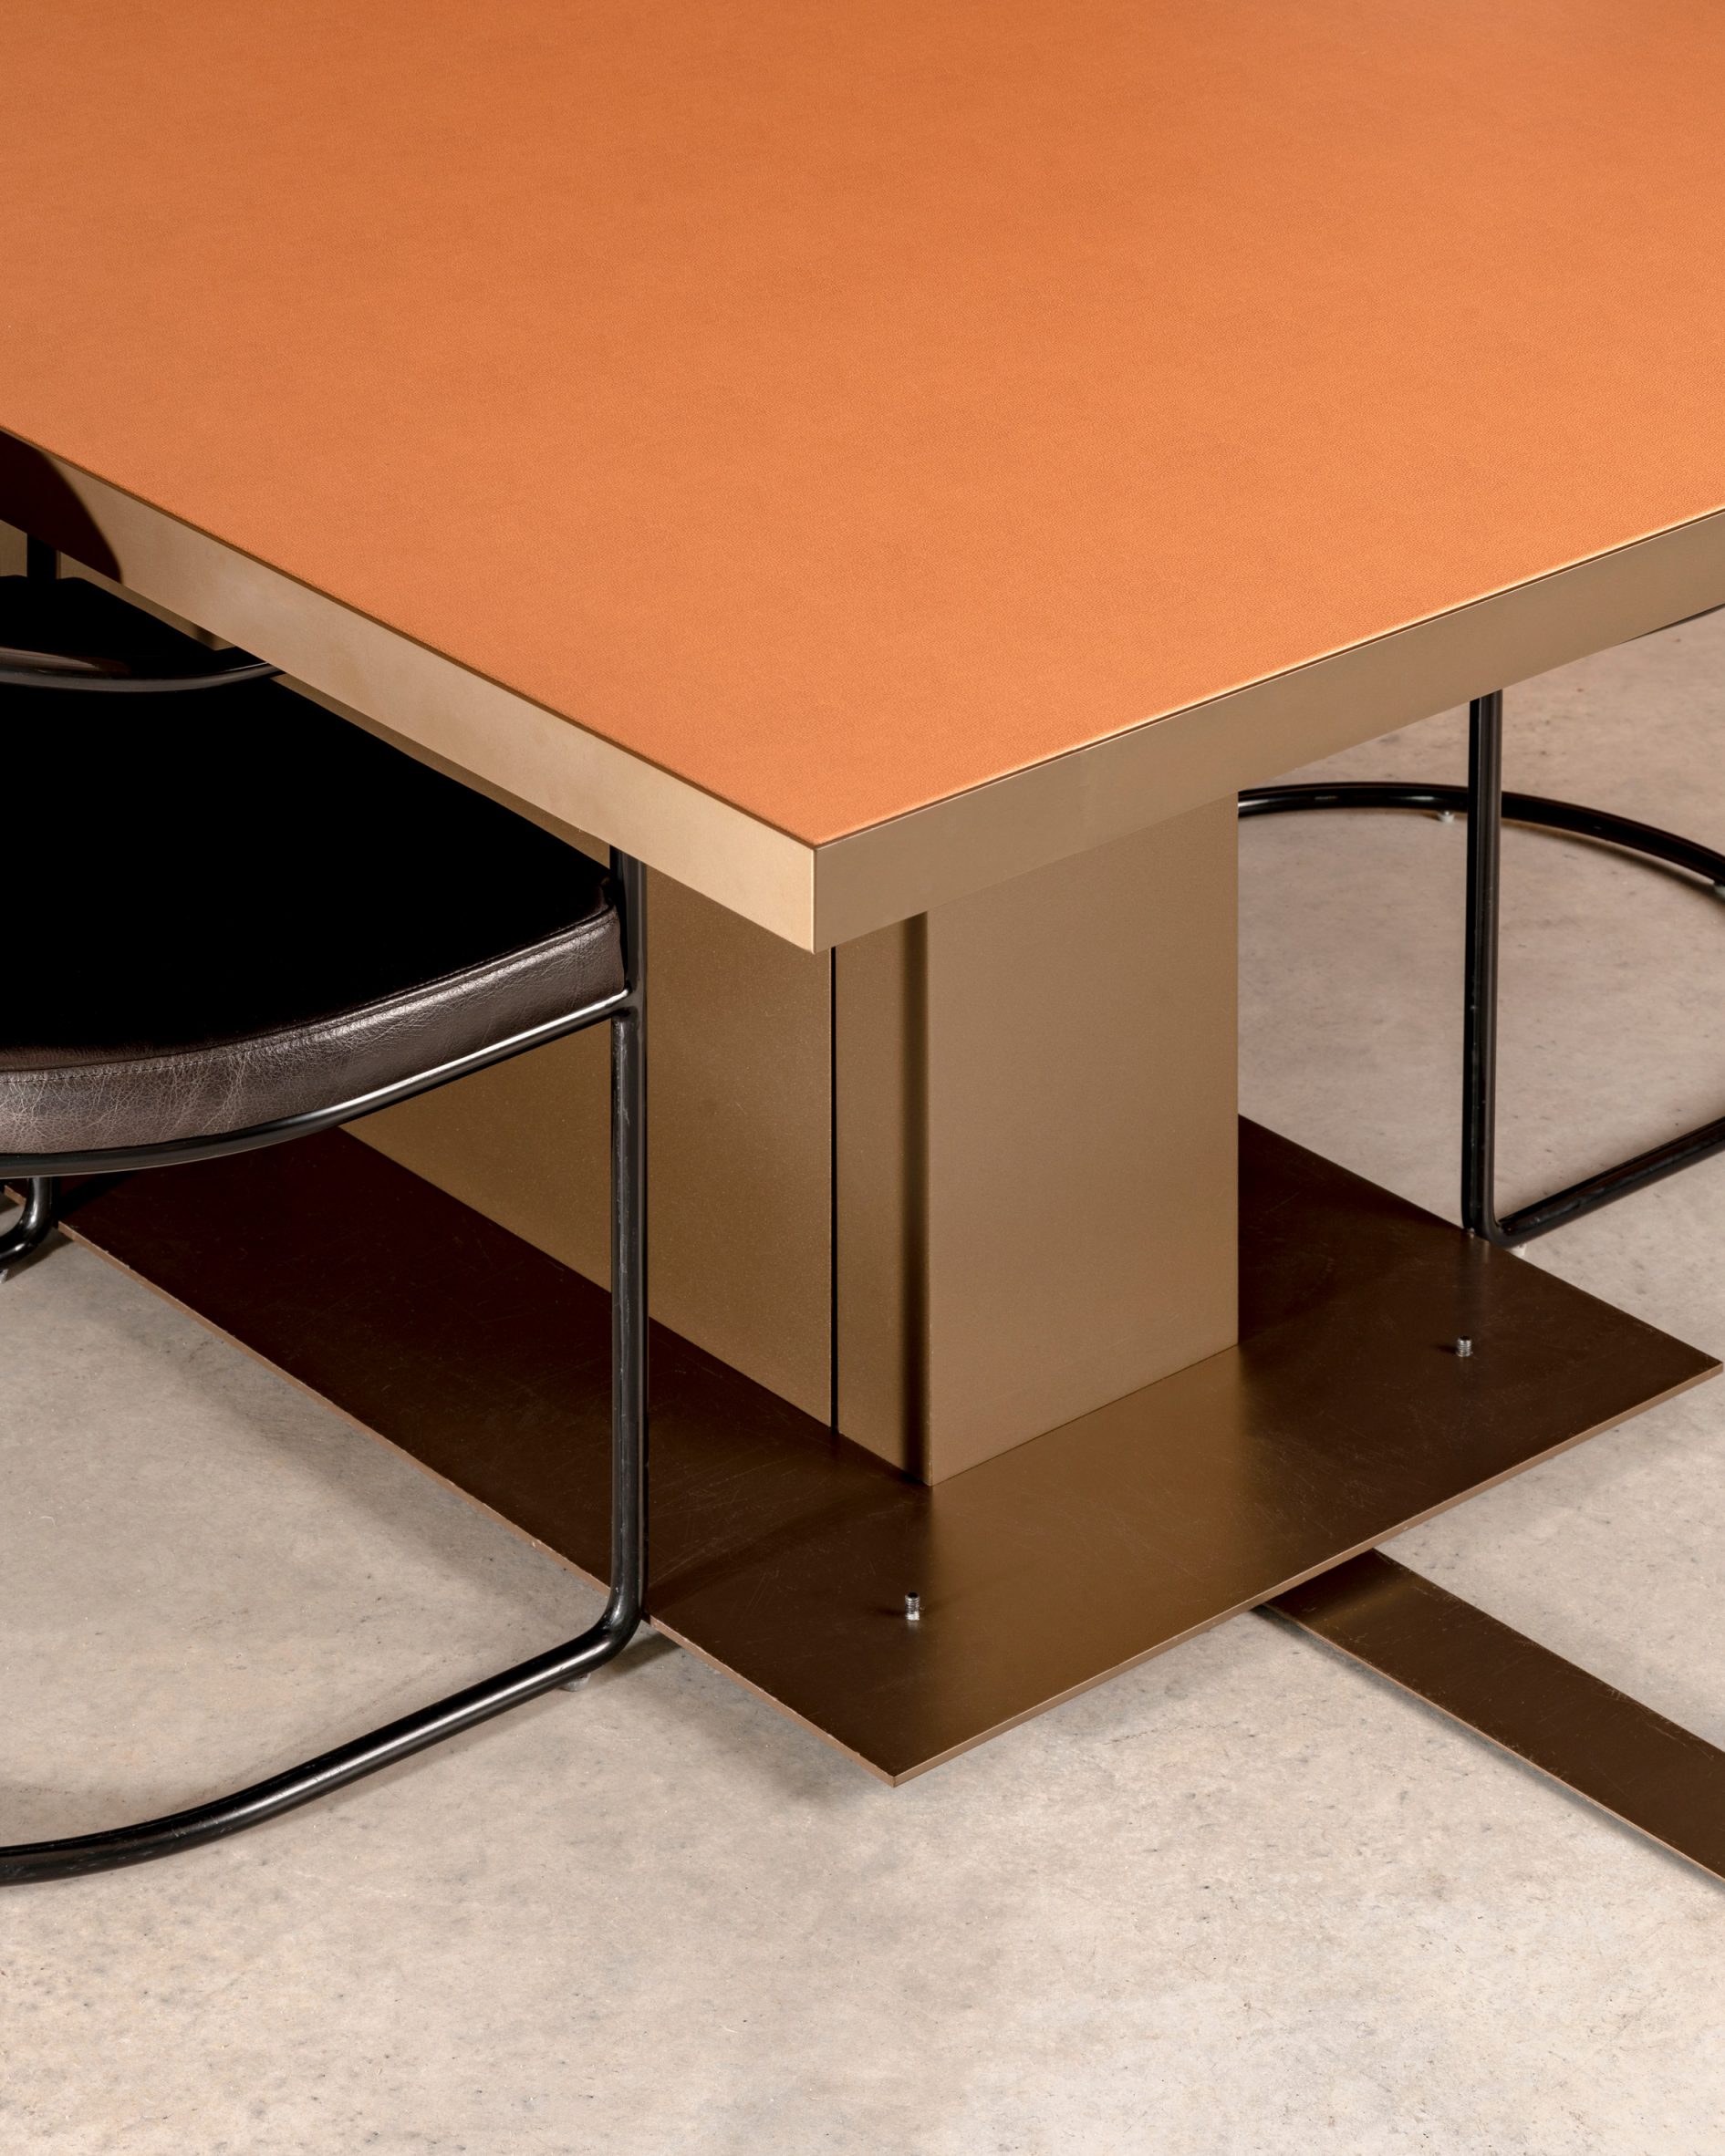 Custom conference table that rolls on built-in track